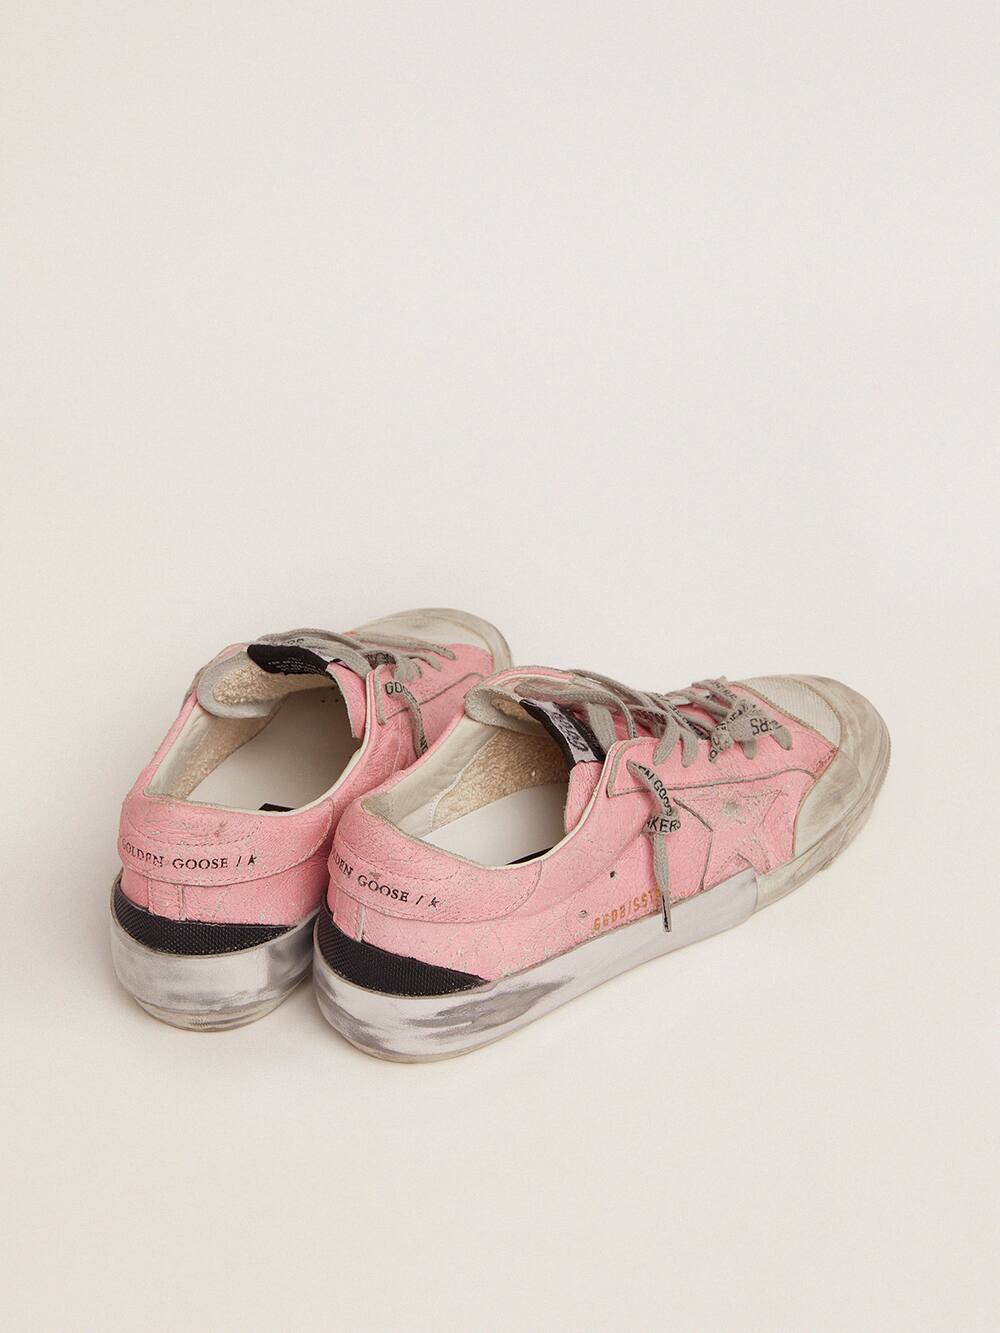 Golden Goose - Super-Star sneakers in pink crackled leather and multi-foxing in 